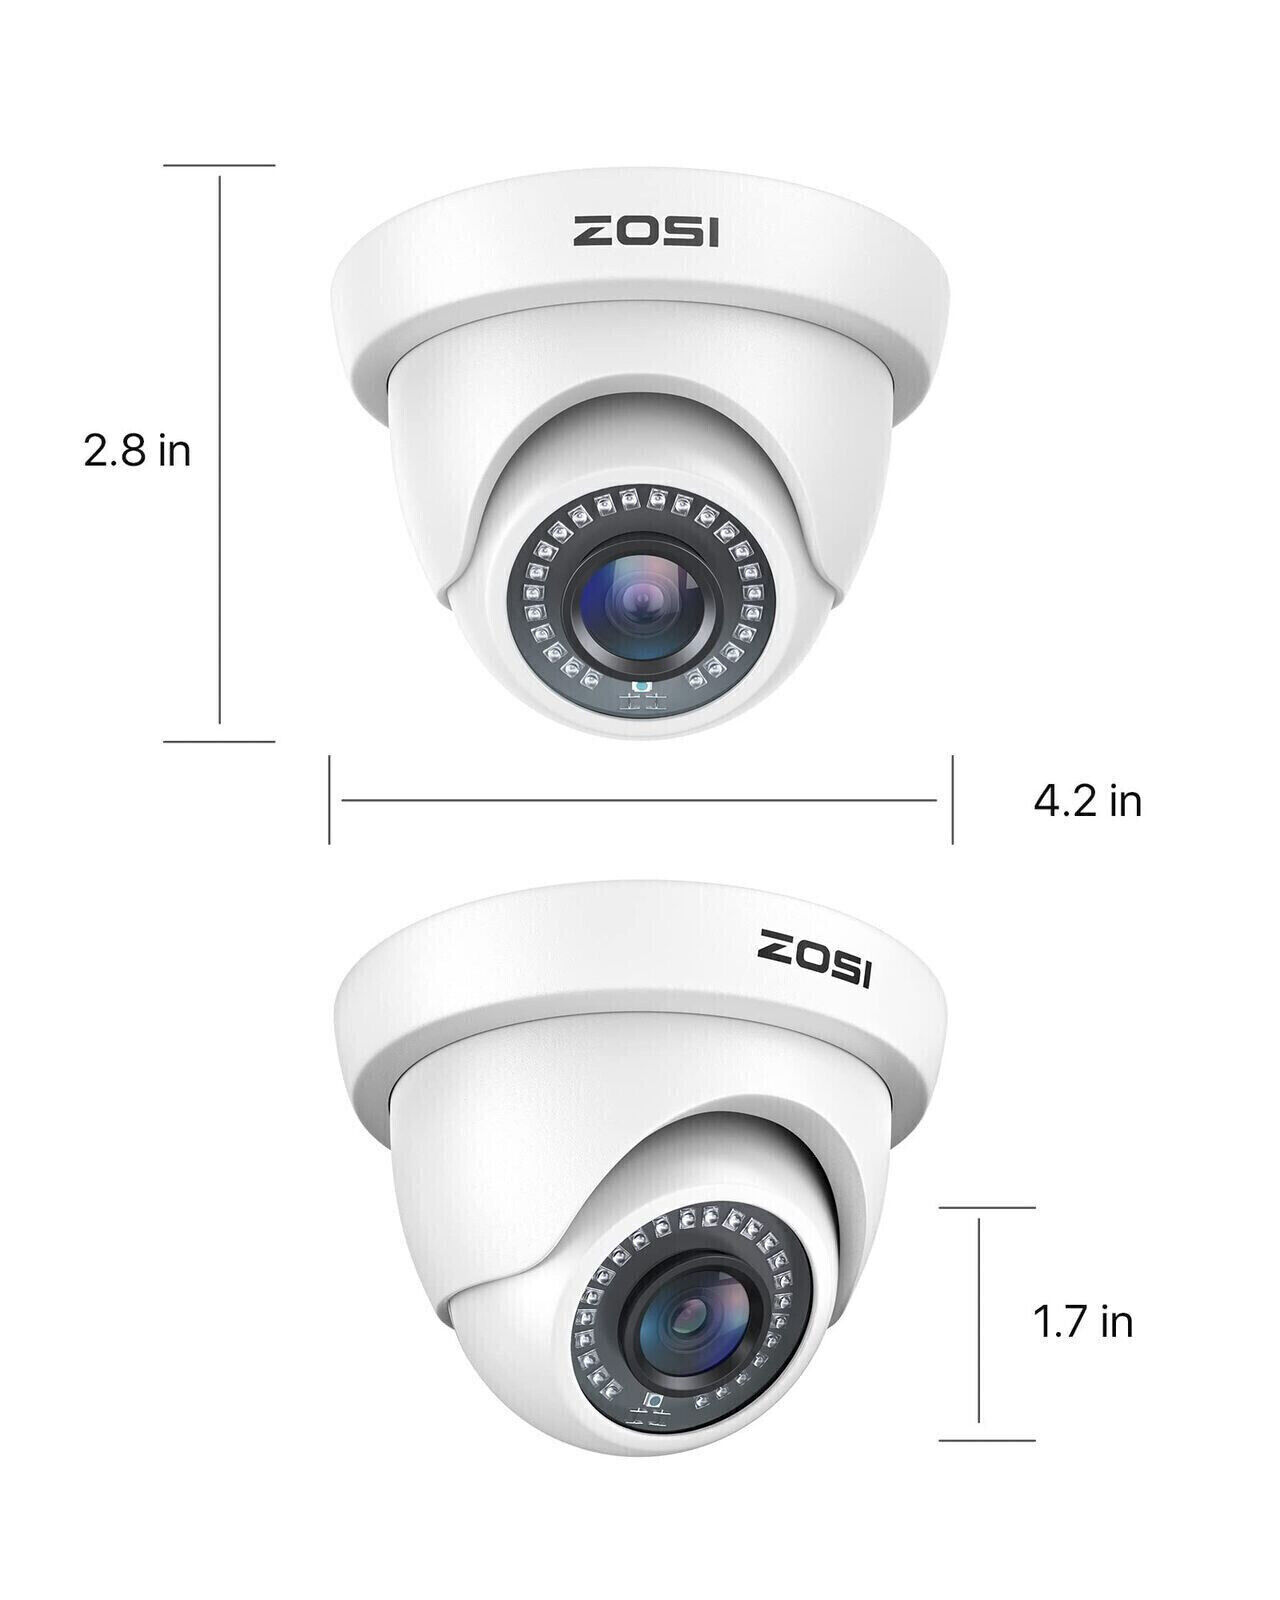 ZOSI 4Pcs 1080p TVI Outdoor CCTV Home Surveillance Security Dome Camera System ZOSI Does Not Apply - фотография #9